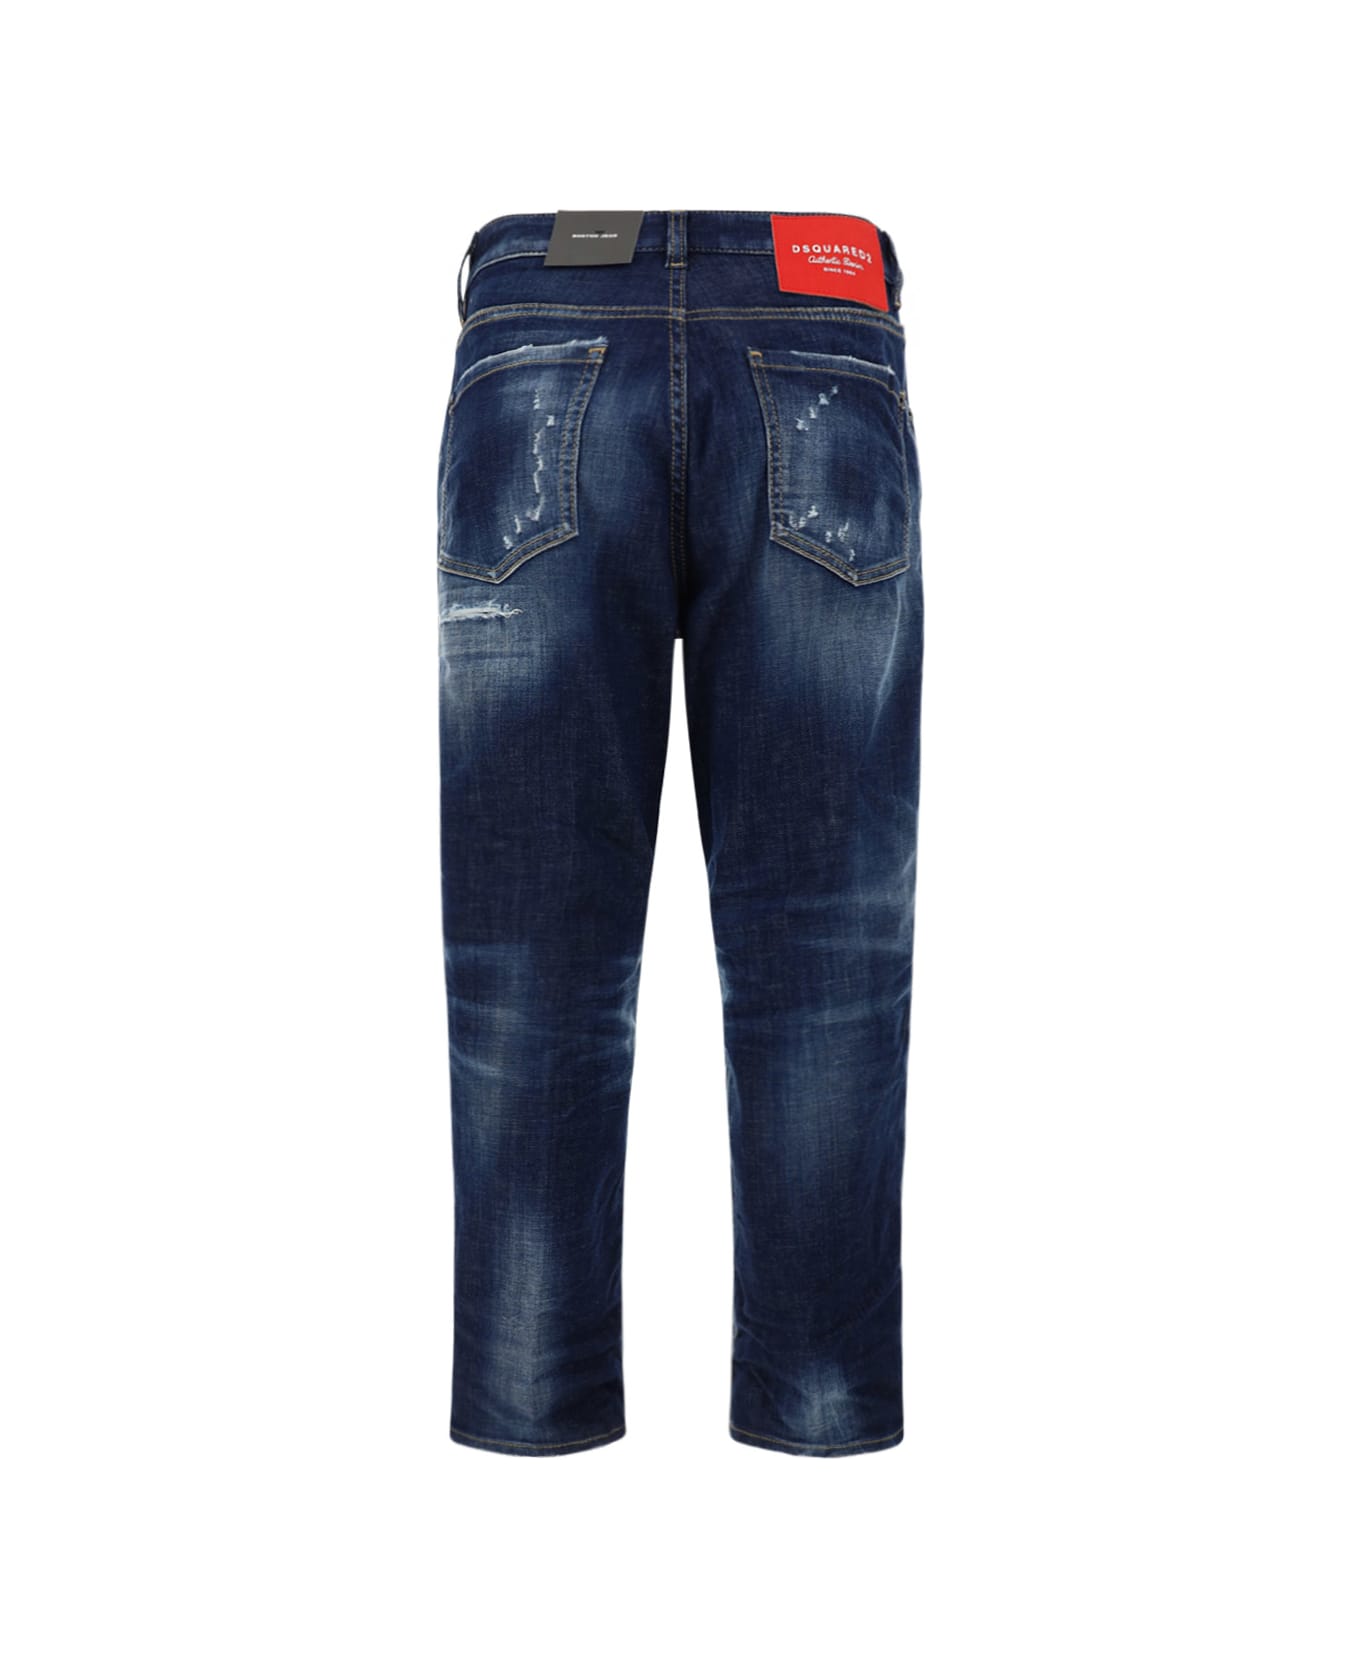 Dsquared2 Jeans - 470 ボトムス